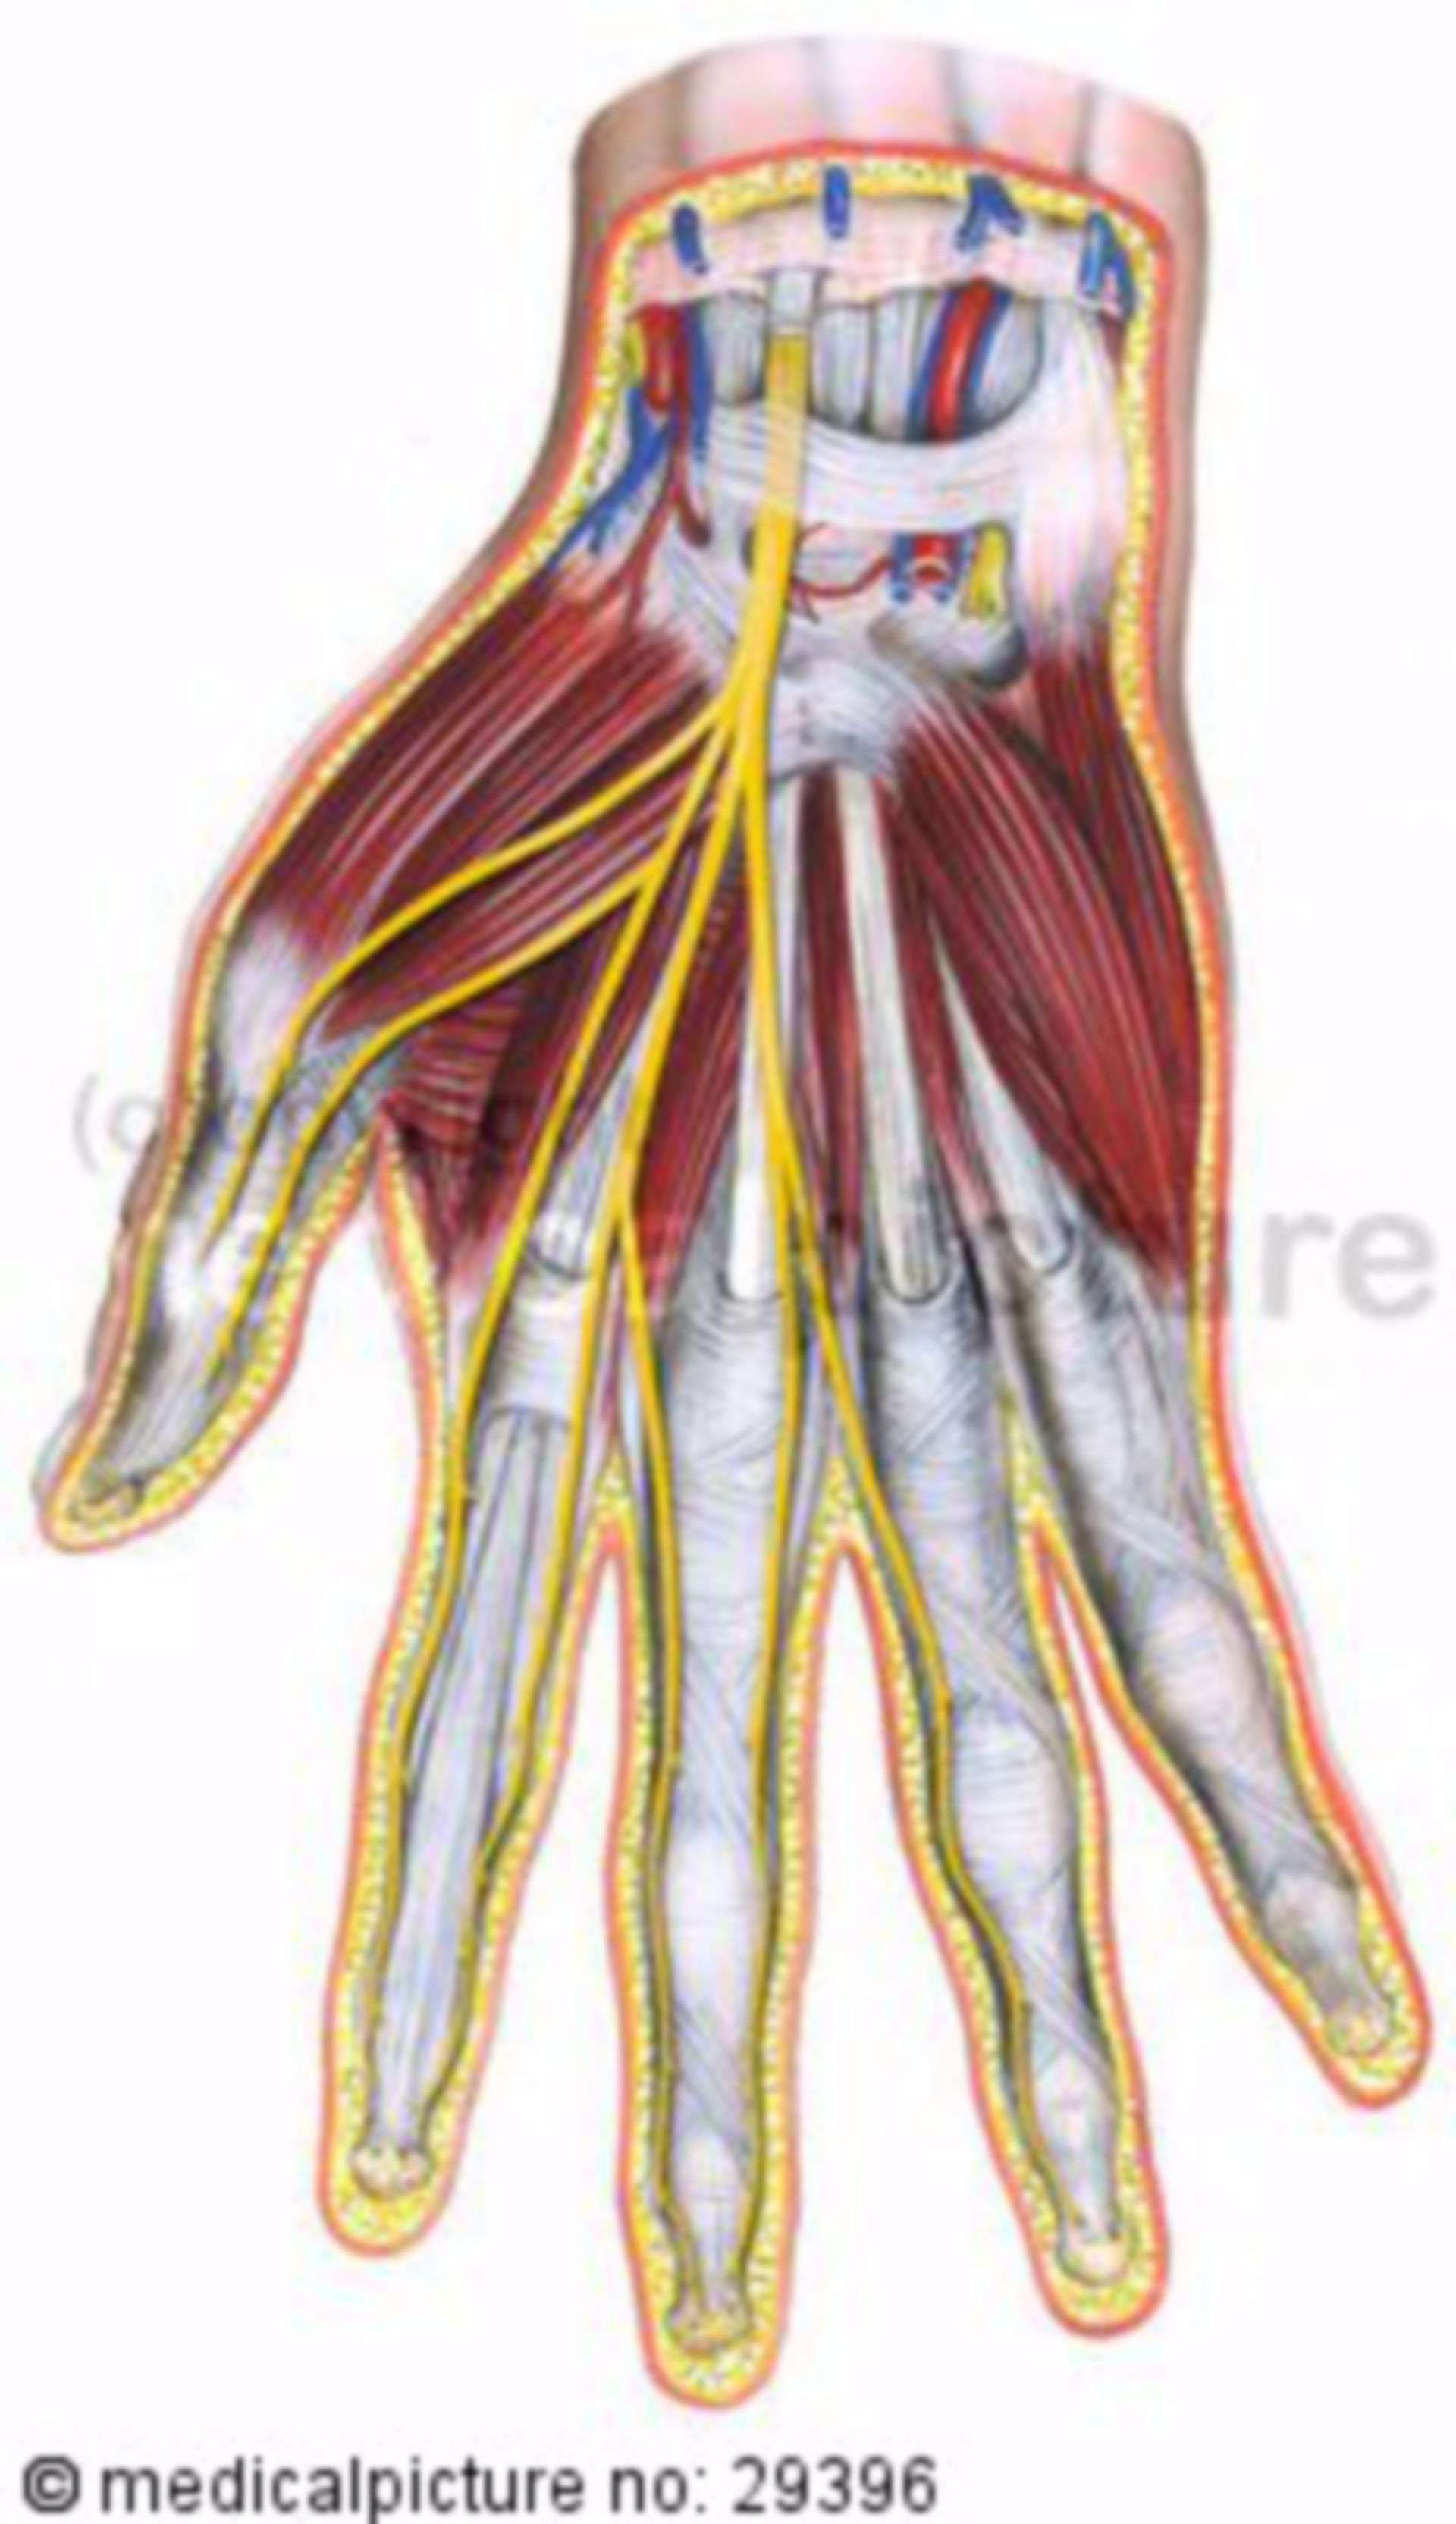 Median nerve of the right hand